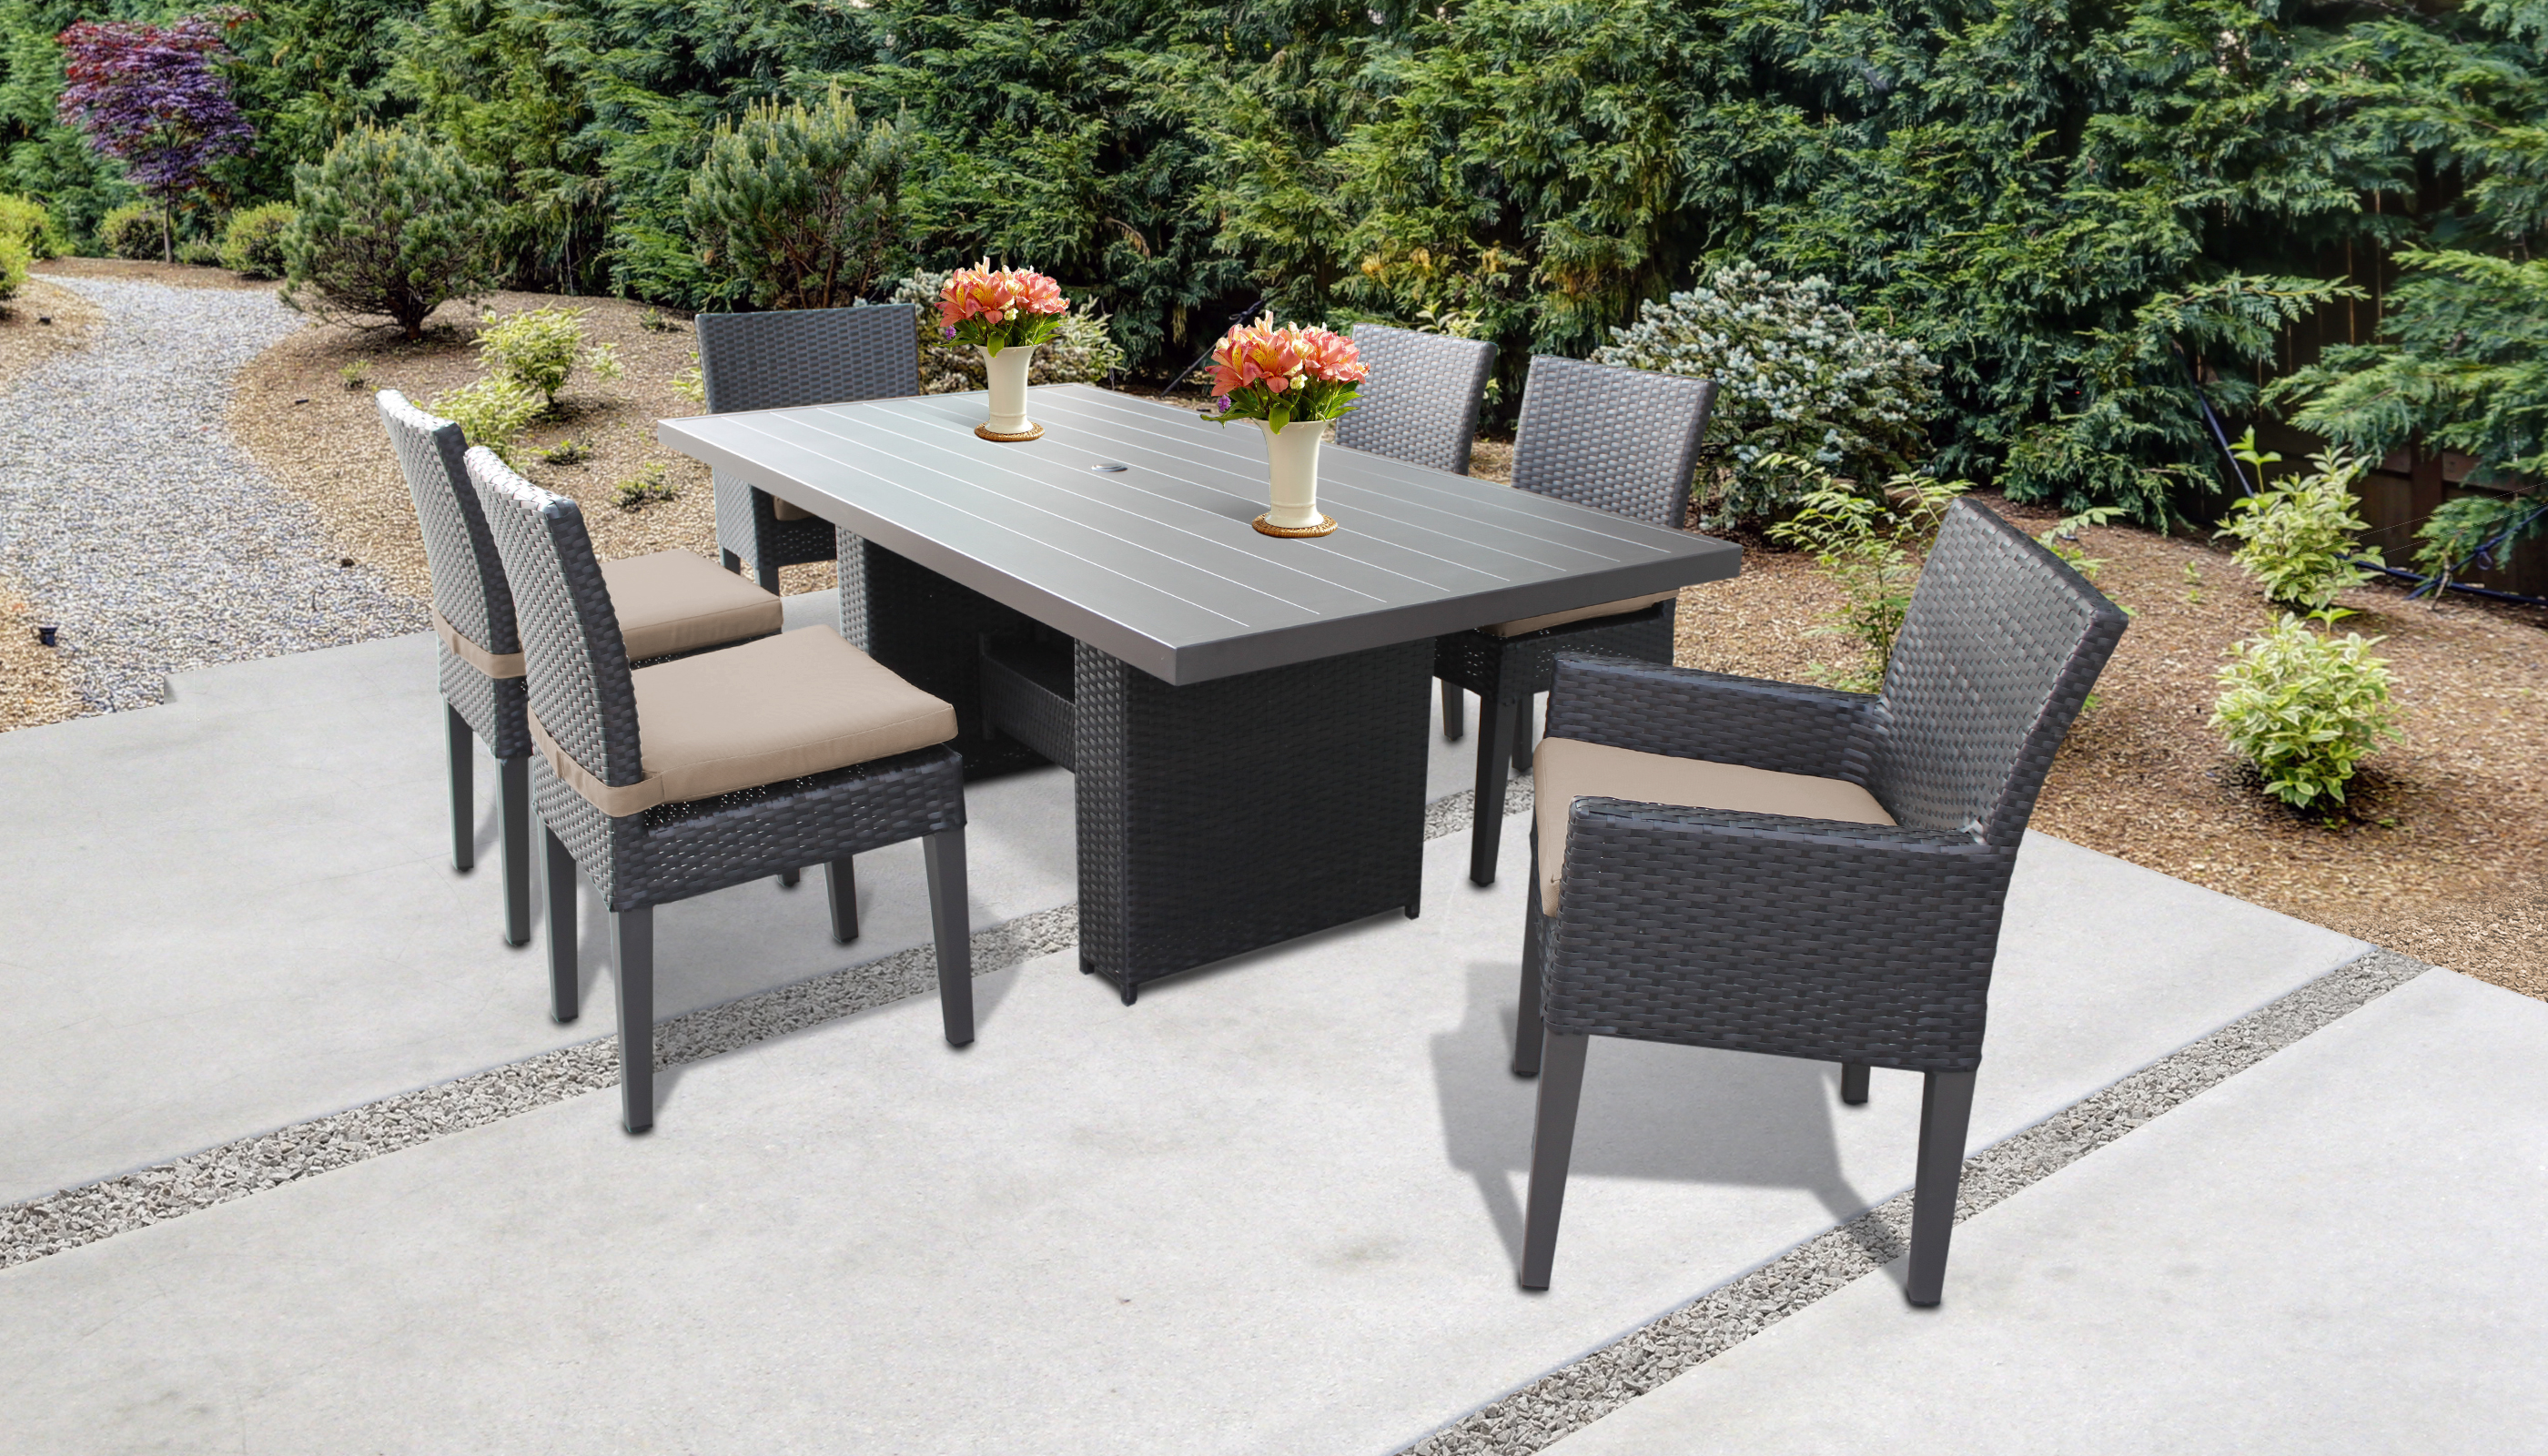 Barbados Rectangular Outdoor Patio Dining Table With 4 ...